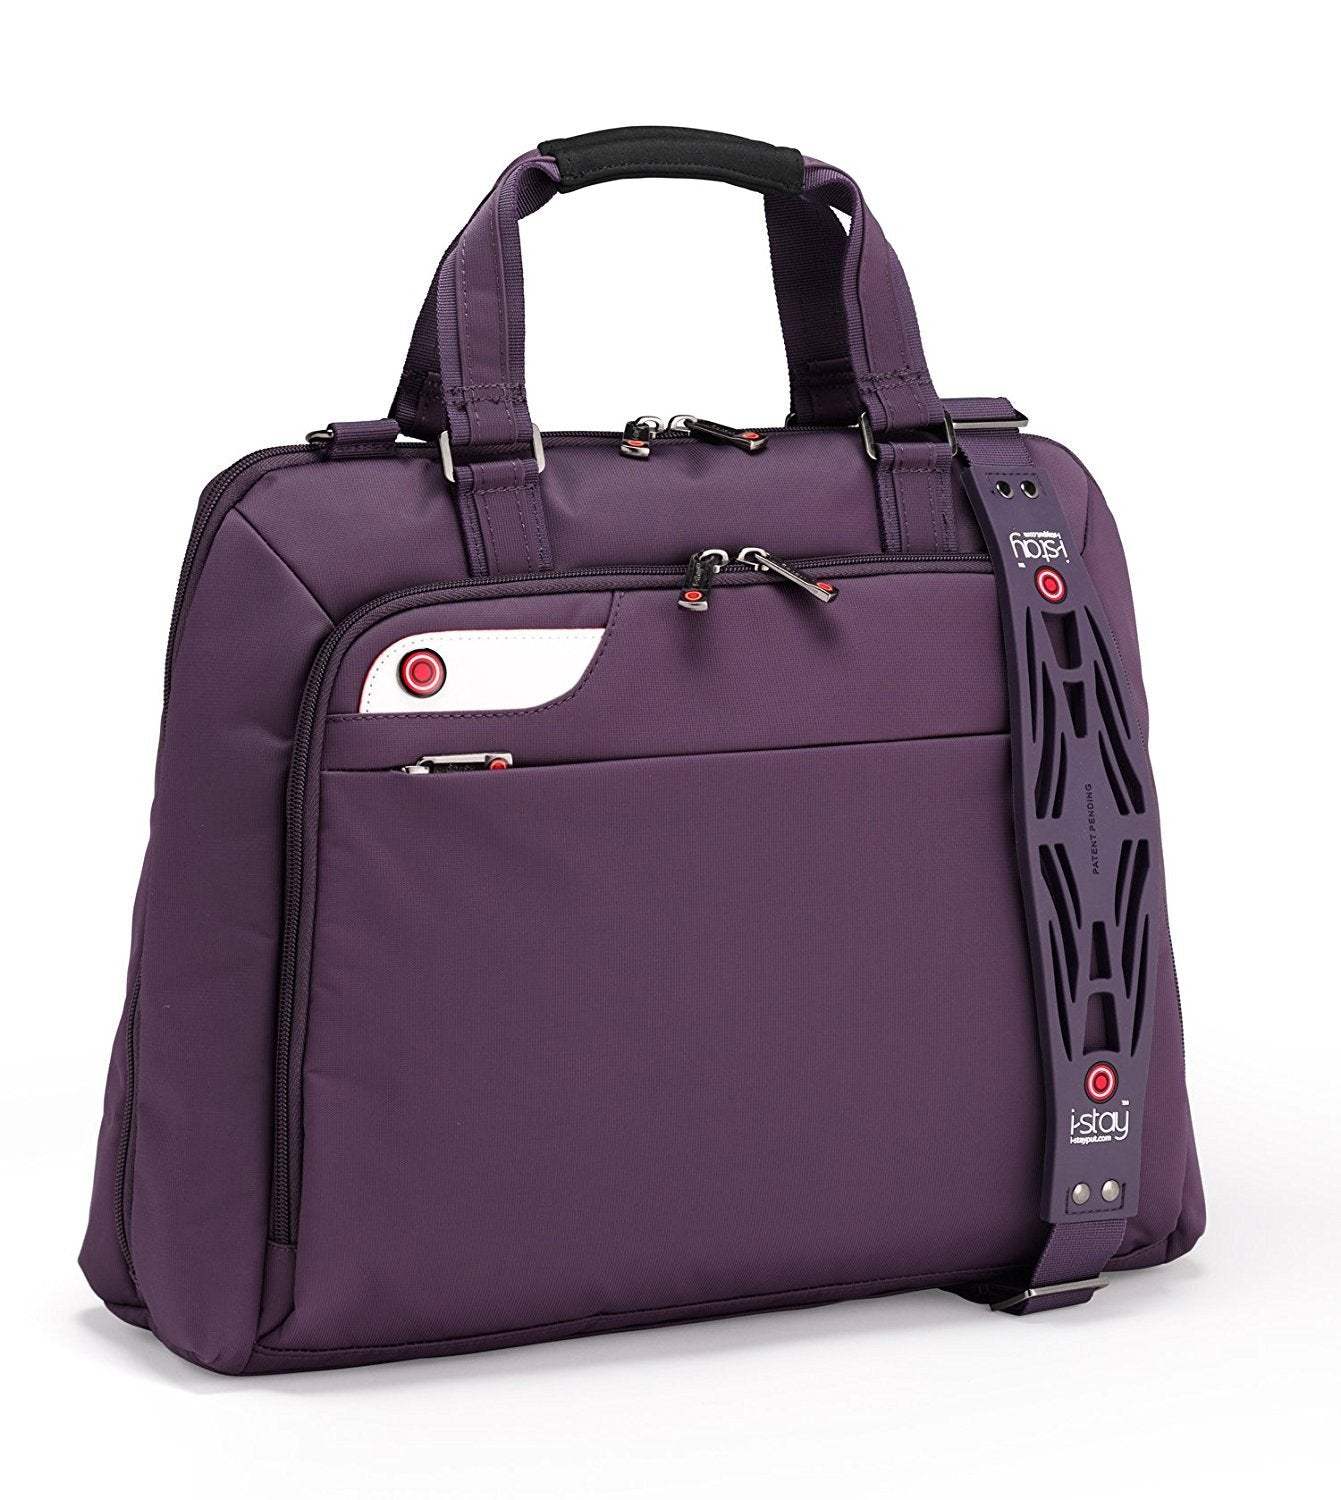 i-stay 15.6-16 inch Ladies Laptop Bag - The Luxury Promotional Gifts Company Limited